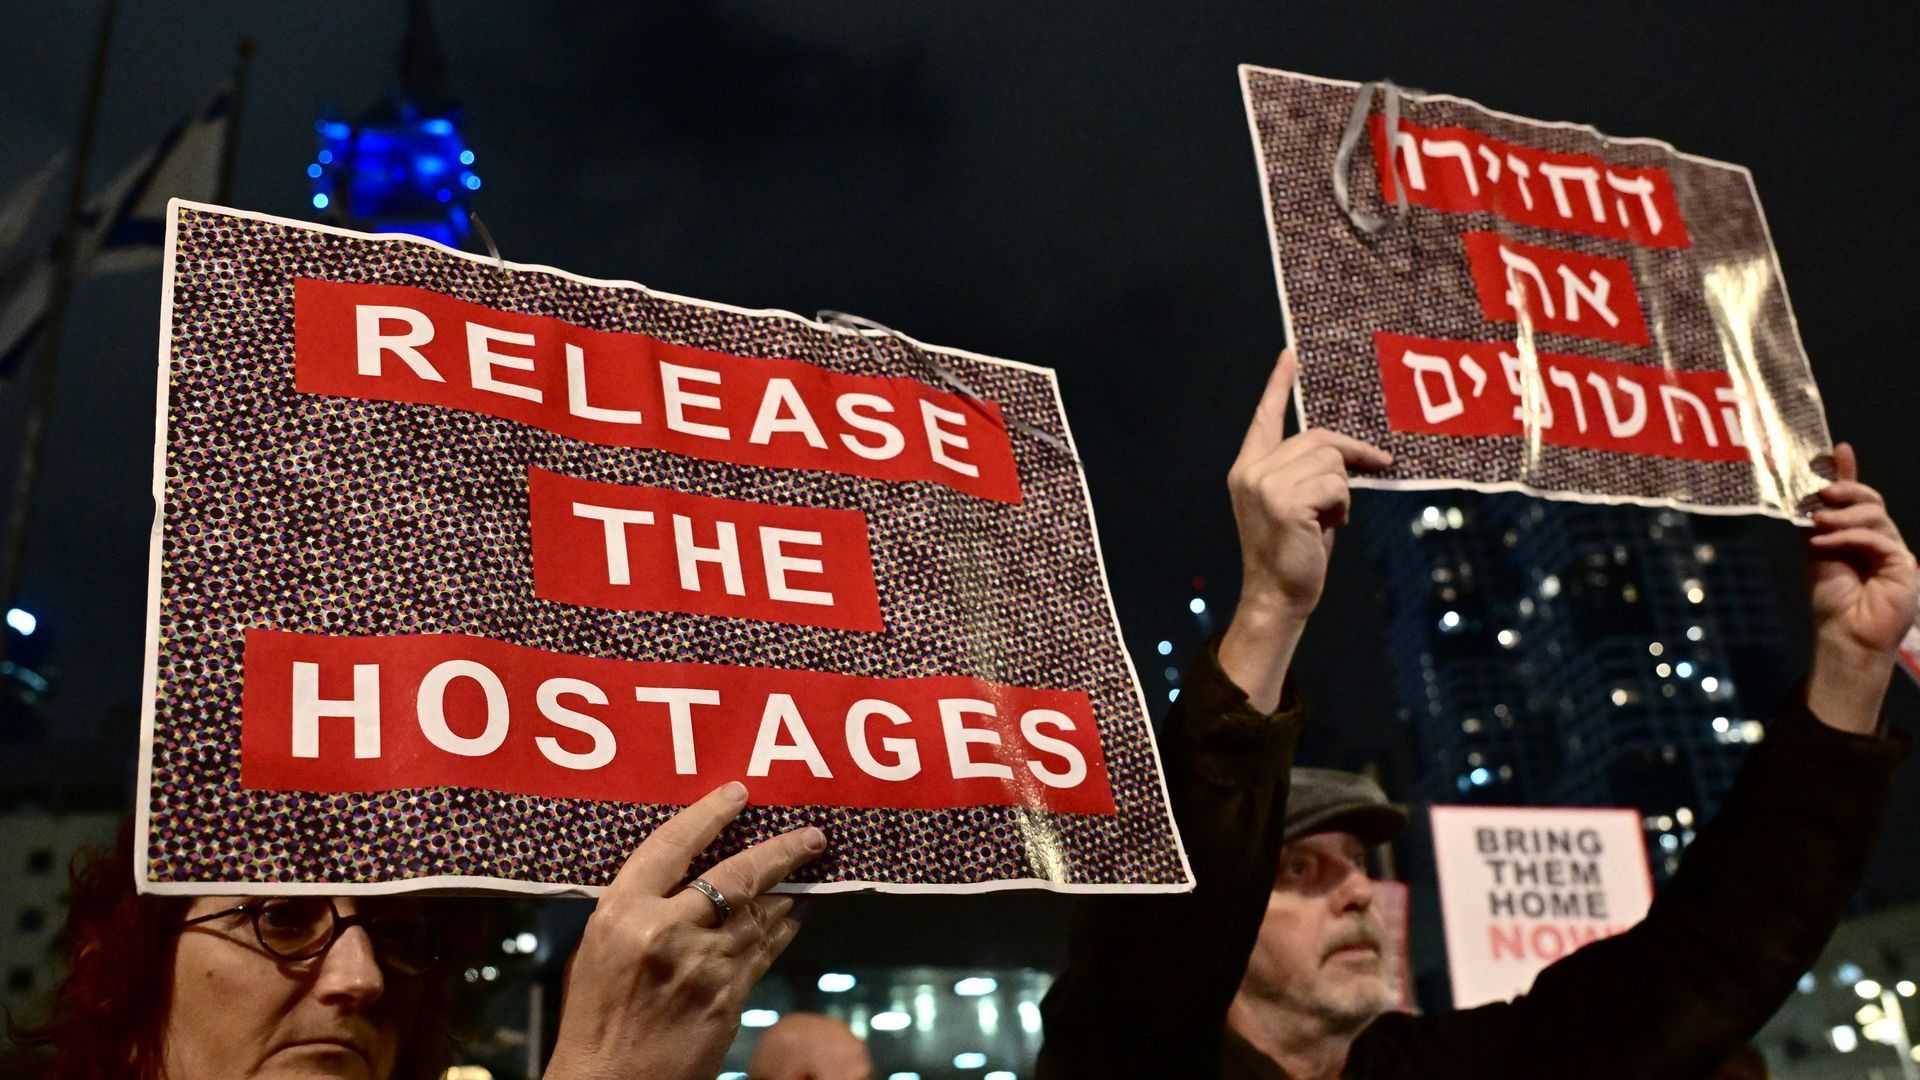 Protesters in Tel Aviv lift placards during a rally for supporters and relatives of Israeli hostages held in Gaza. Photo: Alberto Pizzoli/AFP via Getty Images